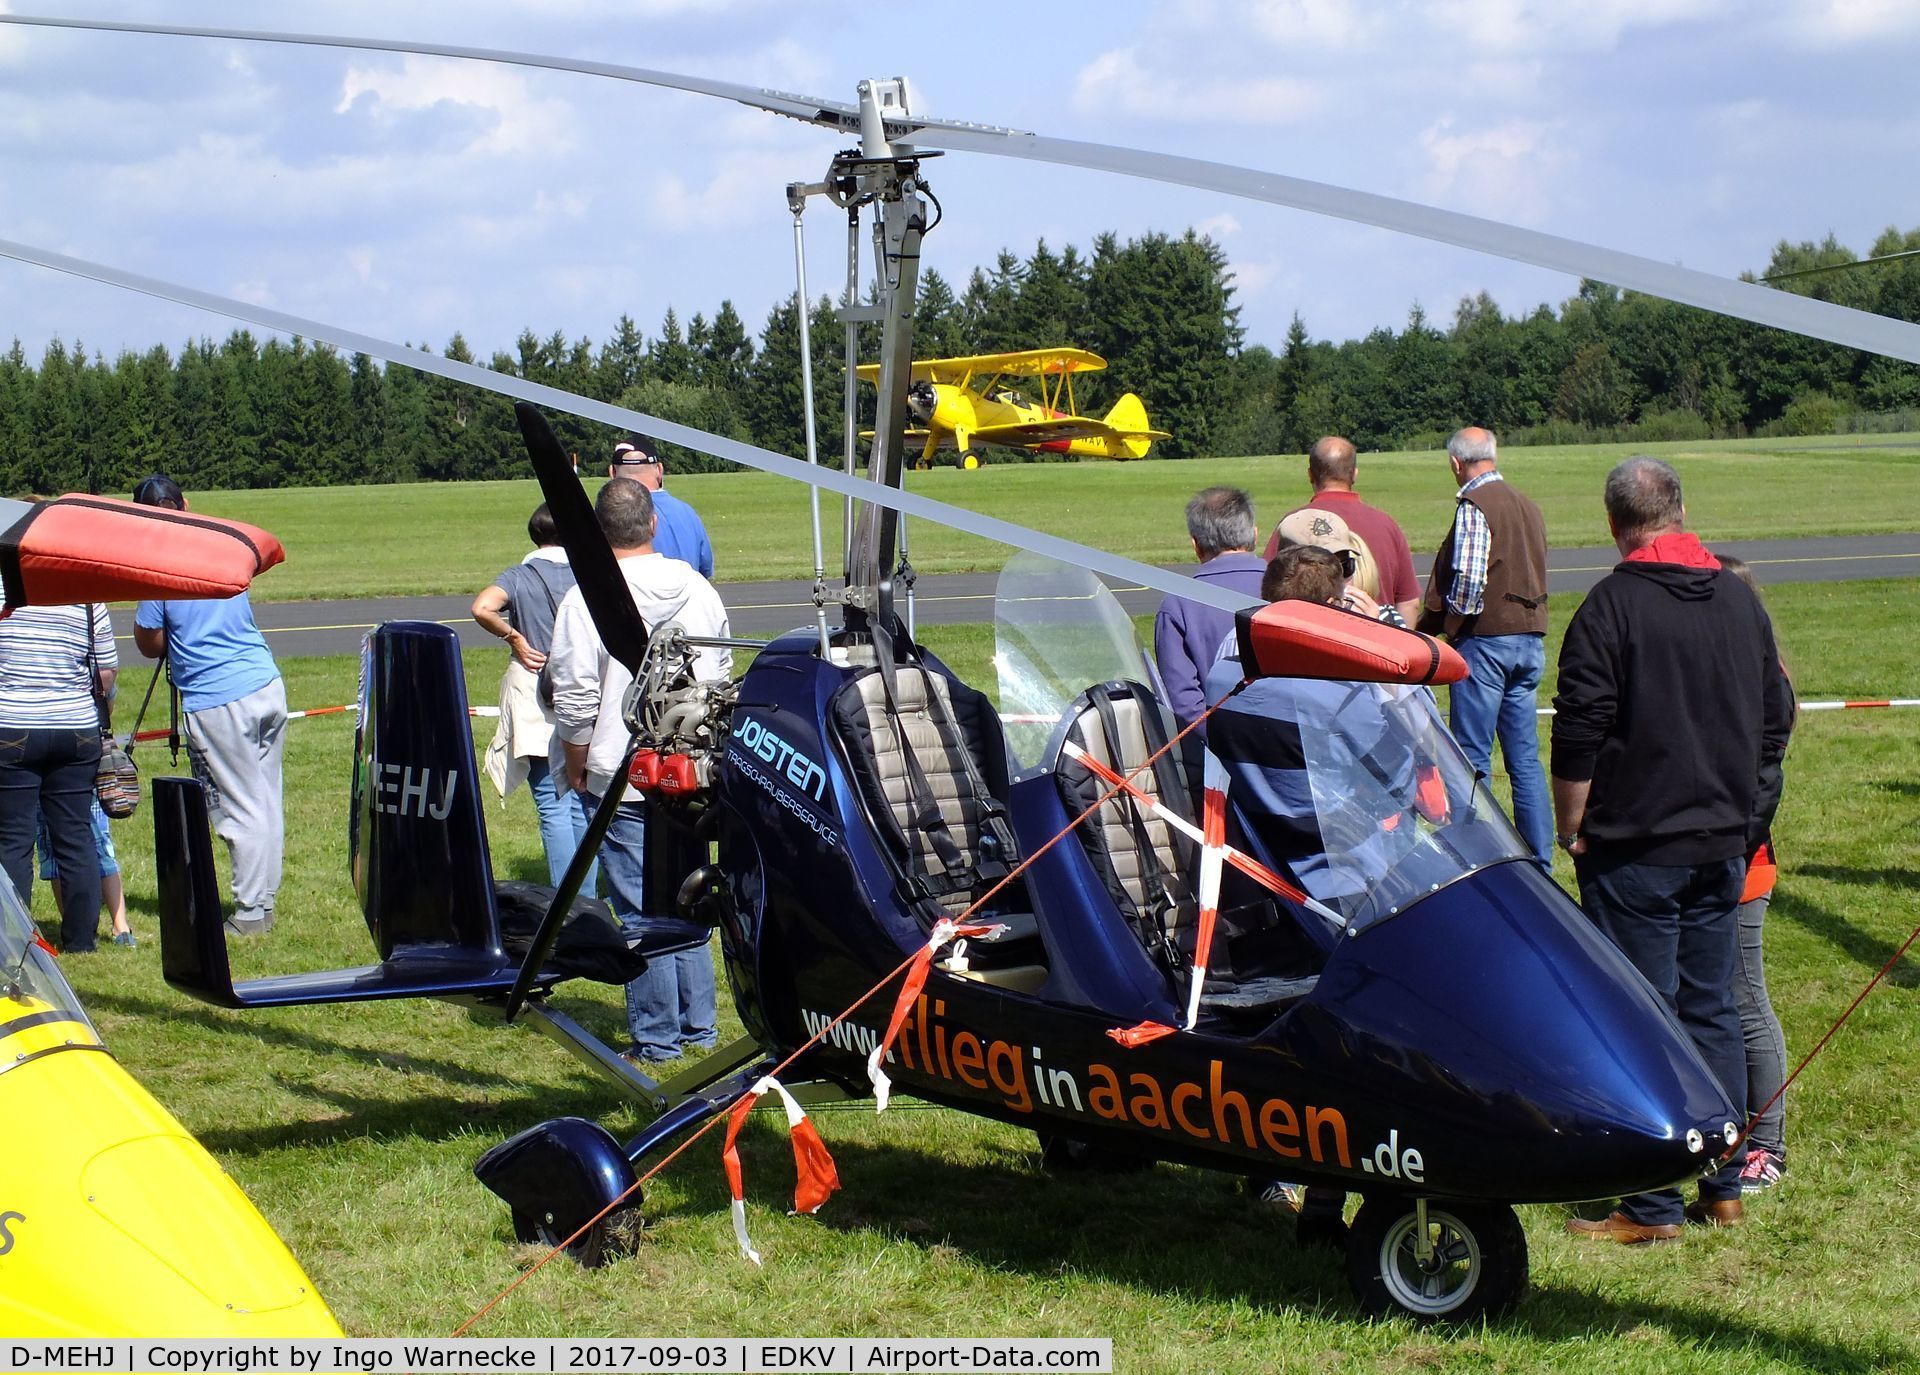 D-MEHJ, AutoGyro MT-03 C/N Not found D-MEHJ, AutoGyro MT-03 Eagle at the Dahlemer Binz 60th jubilee airfield display